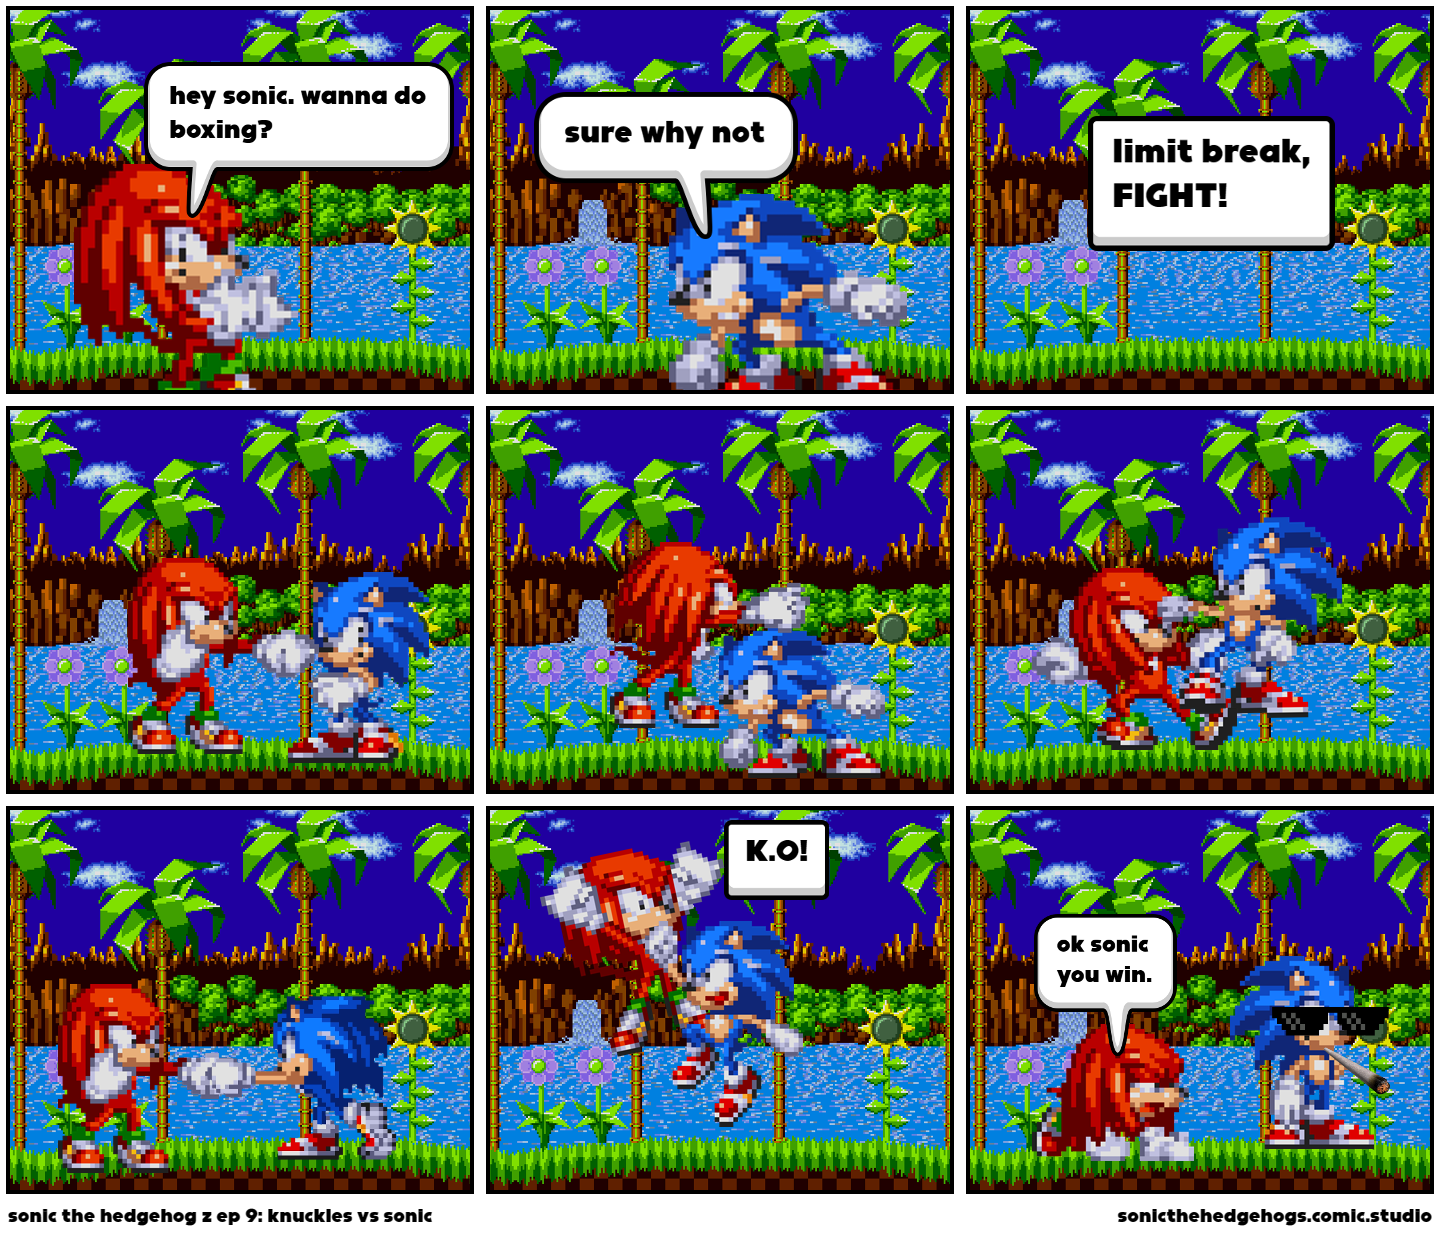 sonic the hedgehog z ep 9: knuckles vs sonic